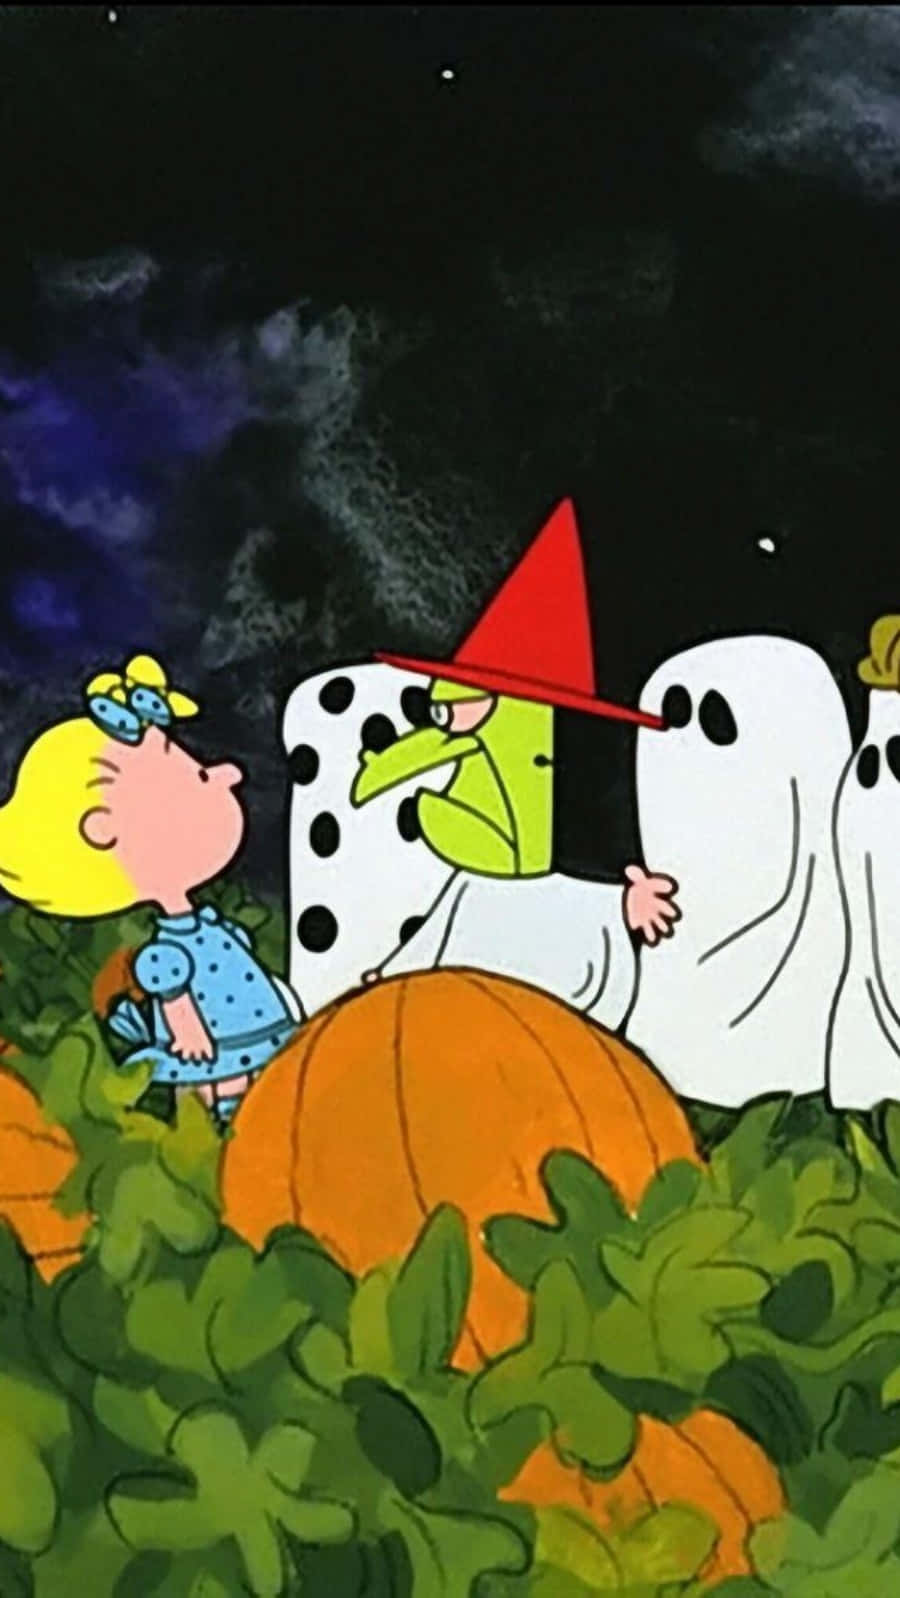 Celebrate this Halloween with Charlie Brown and the gang